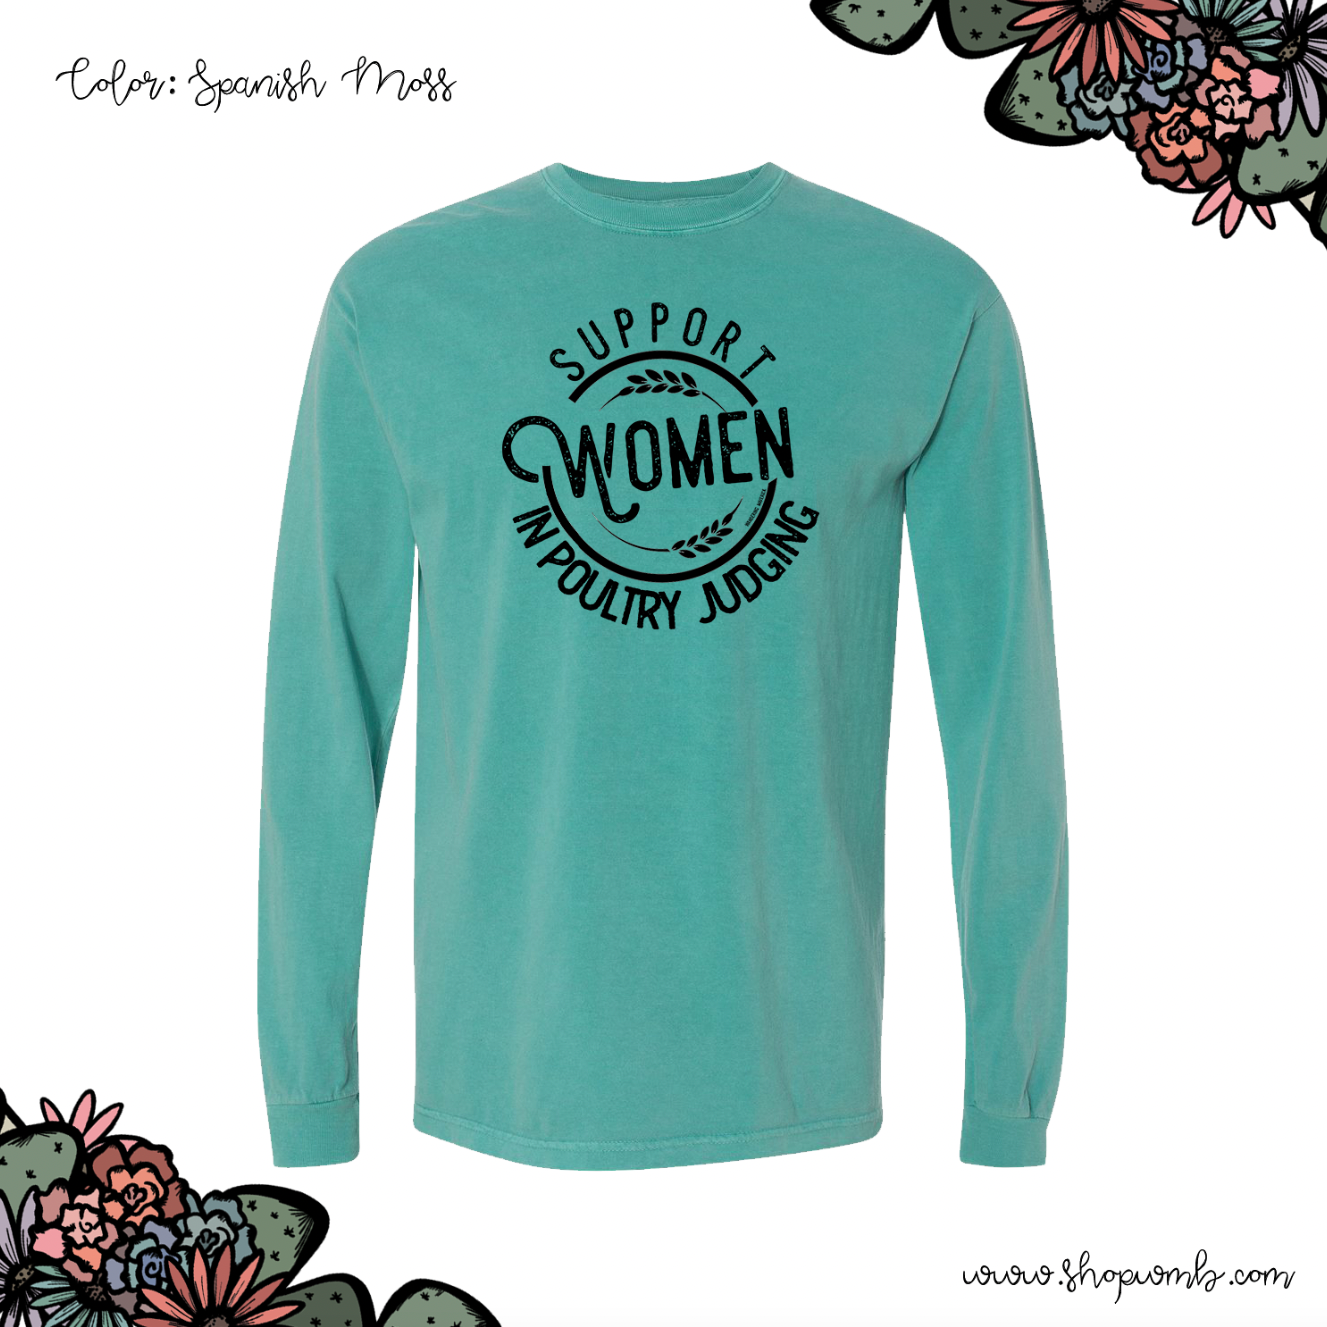 Support Women In Poultry Judging LONG SLEEVE T-Shirt (S-3XL) - Multiple Colors!